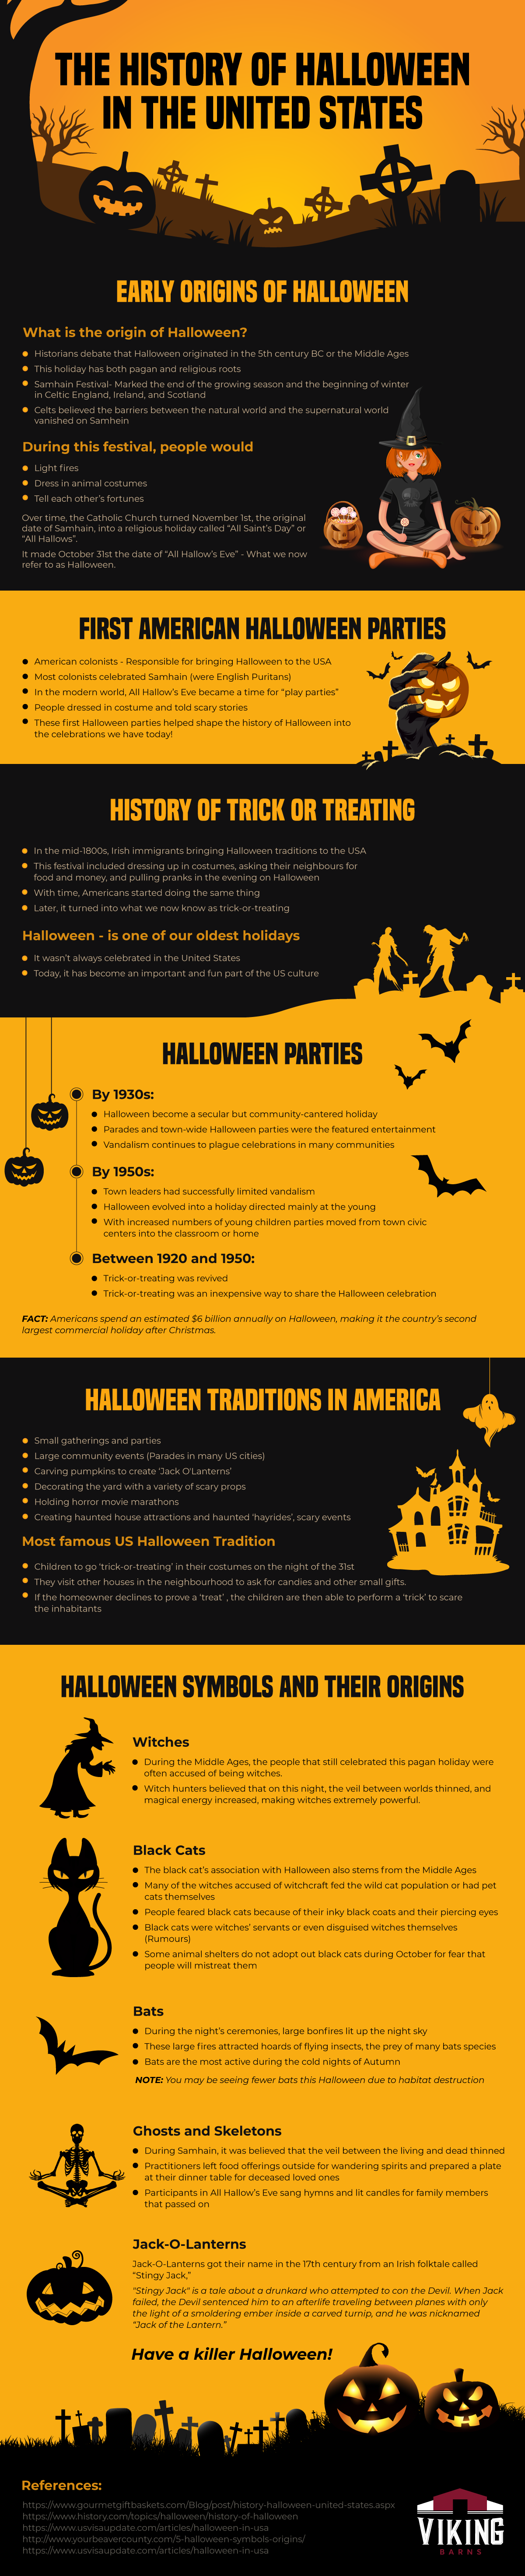 The History of Halloween in the United States